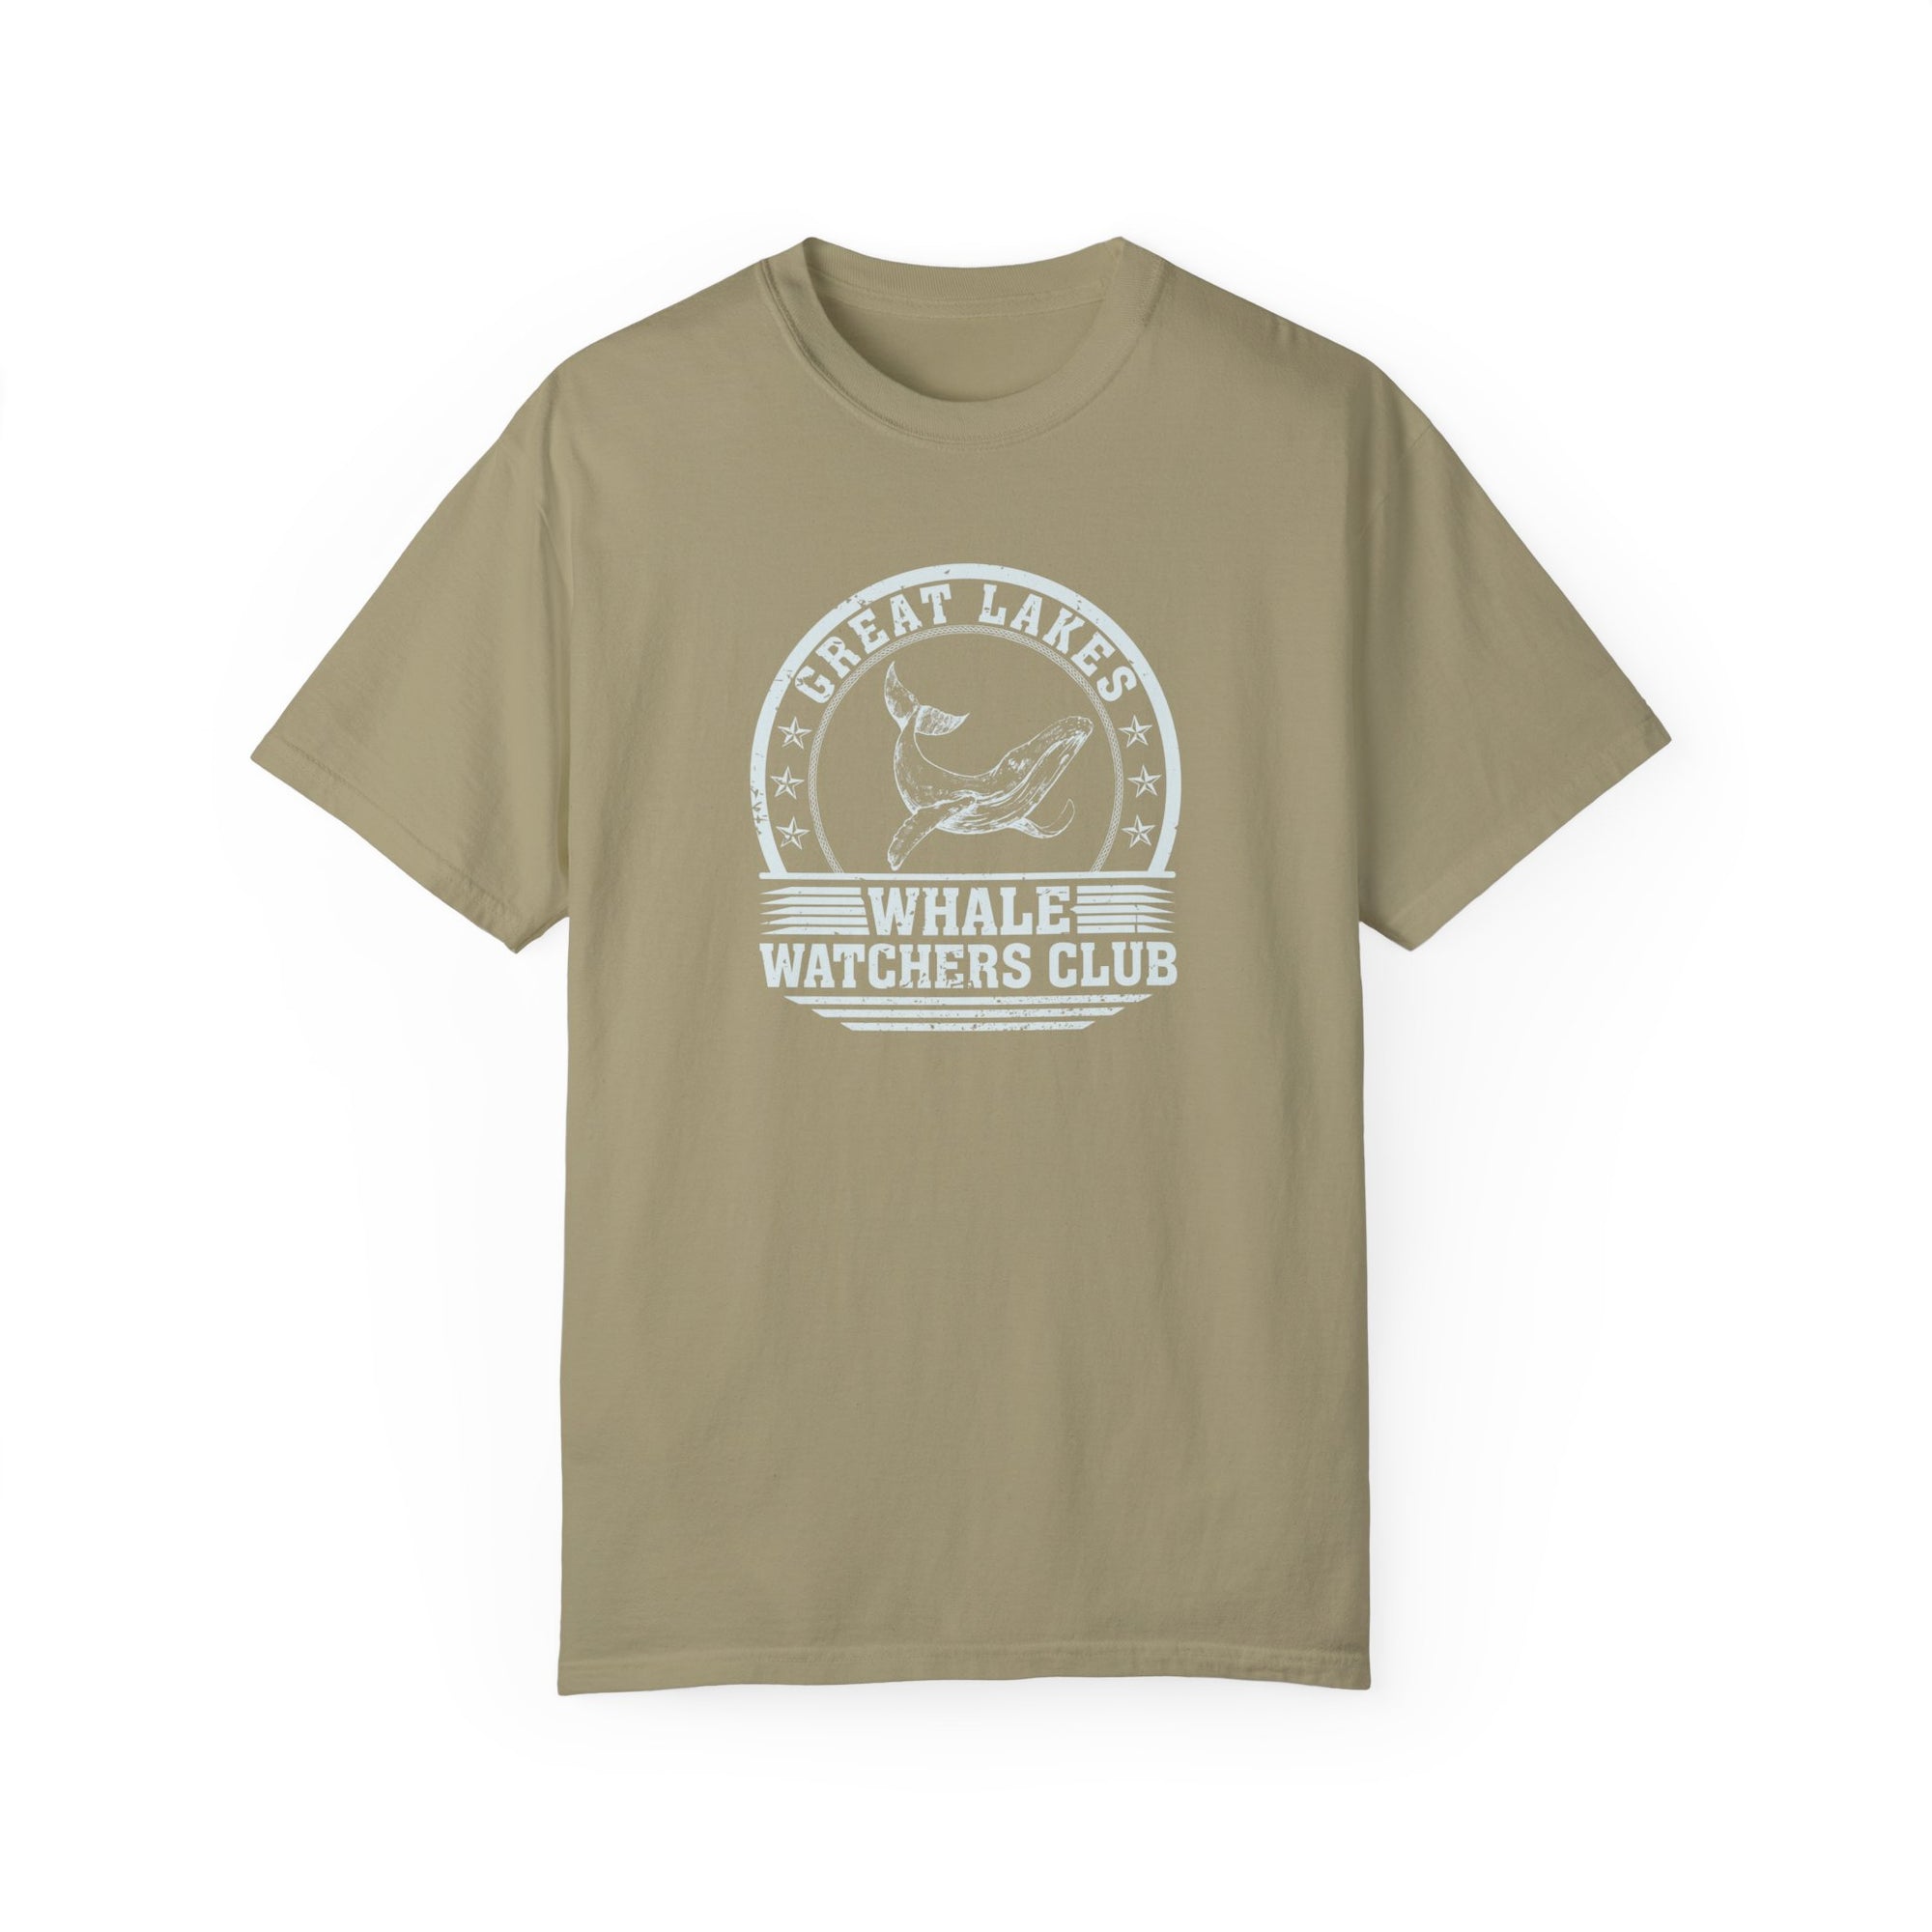 Great Lakes Whale Watchers Tee